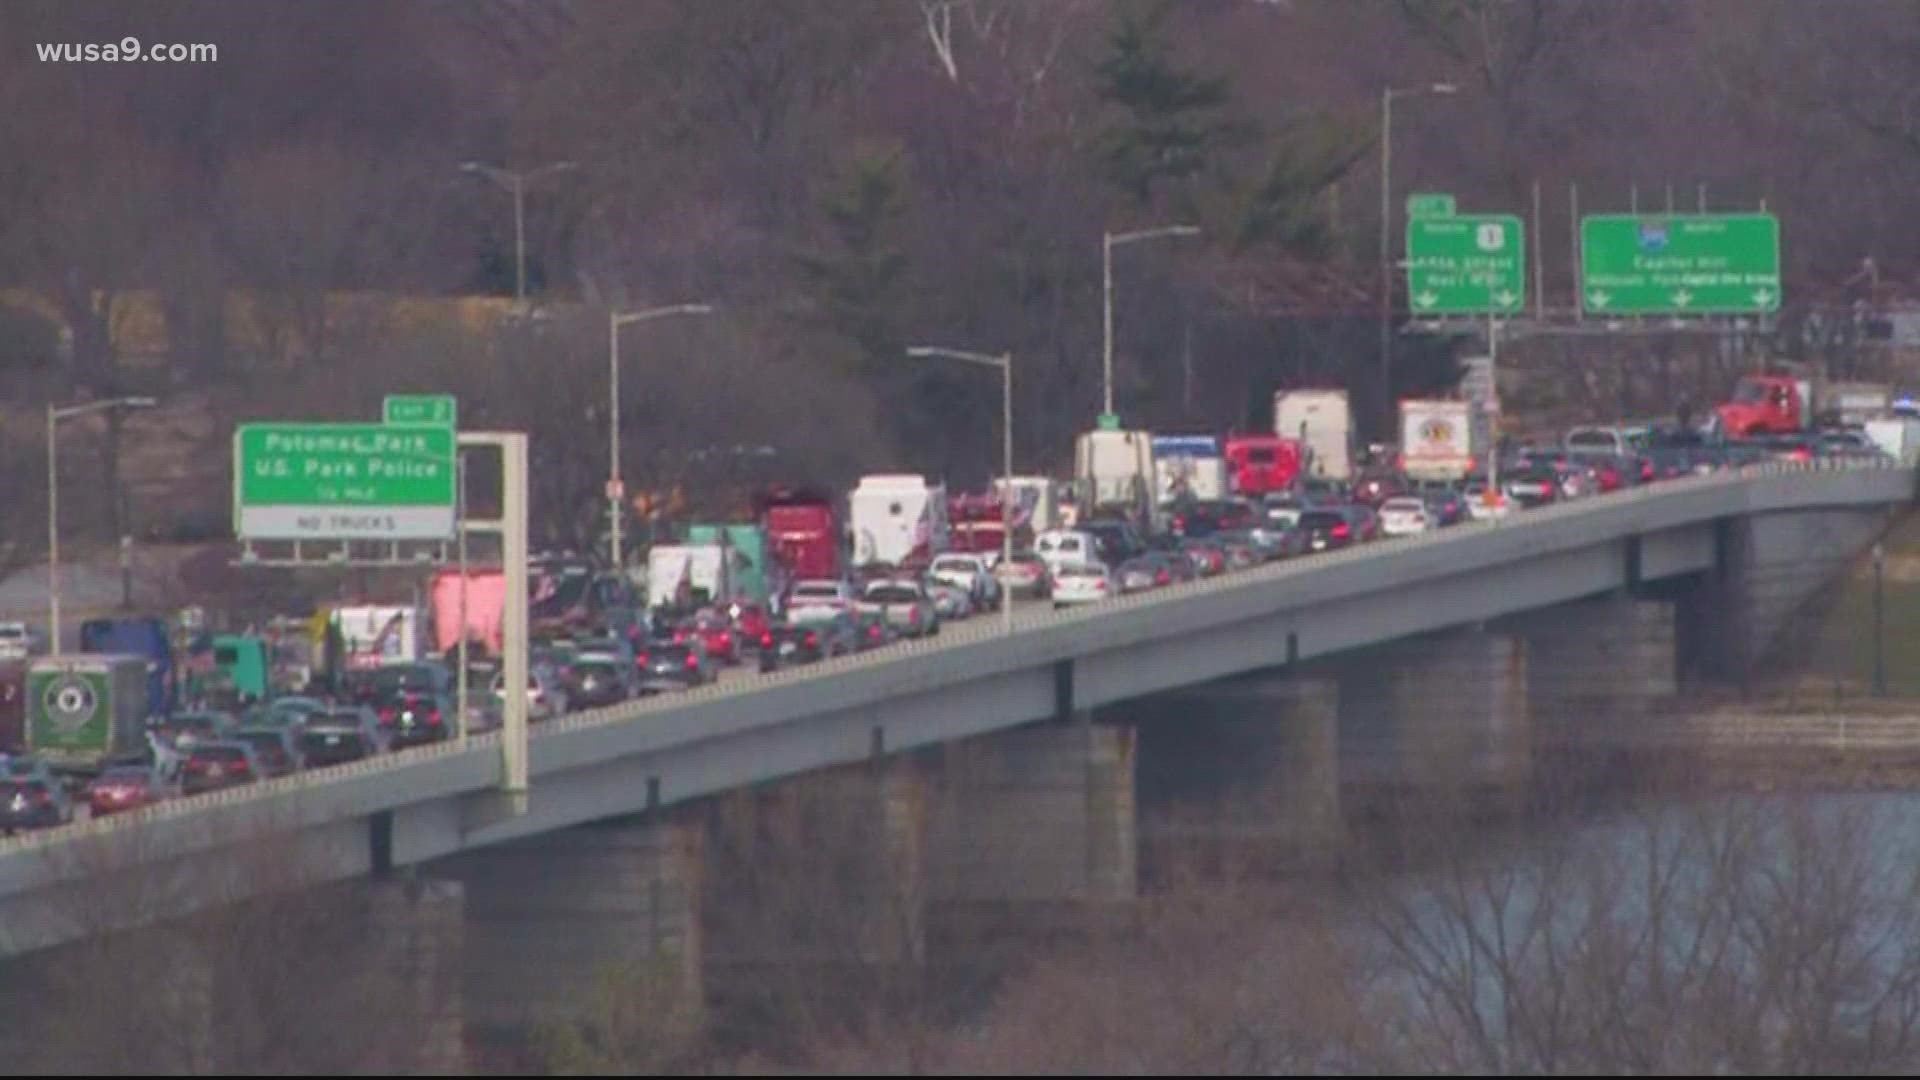 The convoy of truckers demanding an end to vaccine mandates across the country continued to hold up DMV drivers Wednesday.